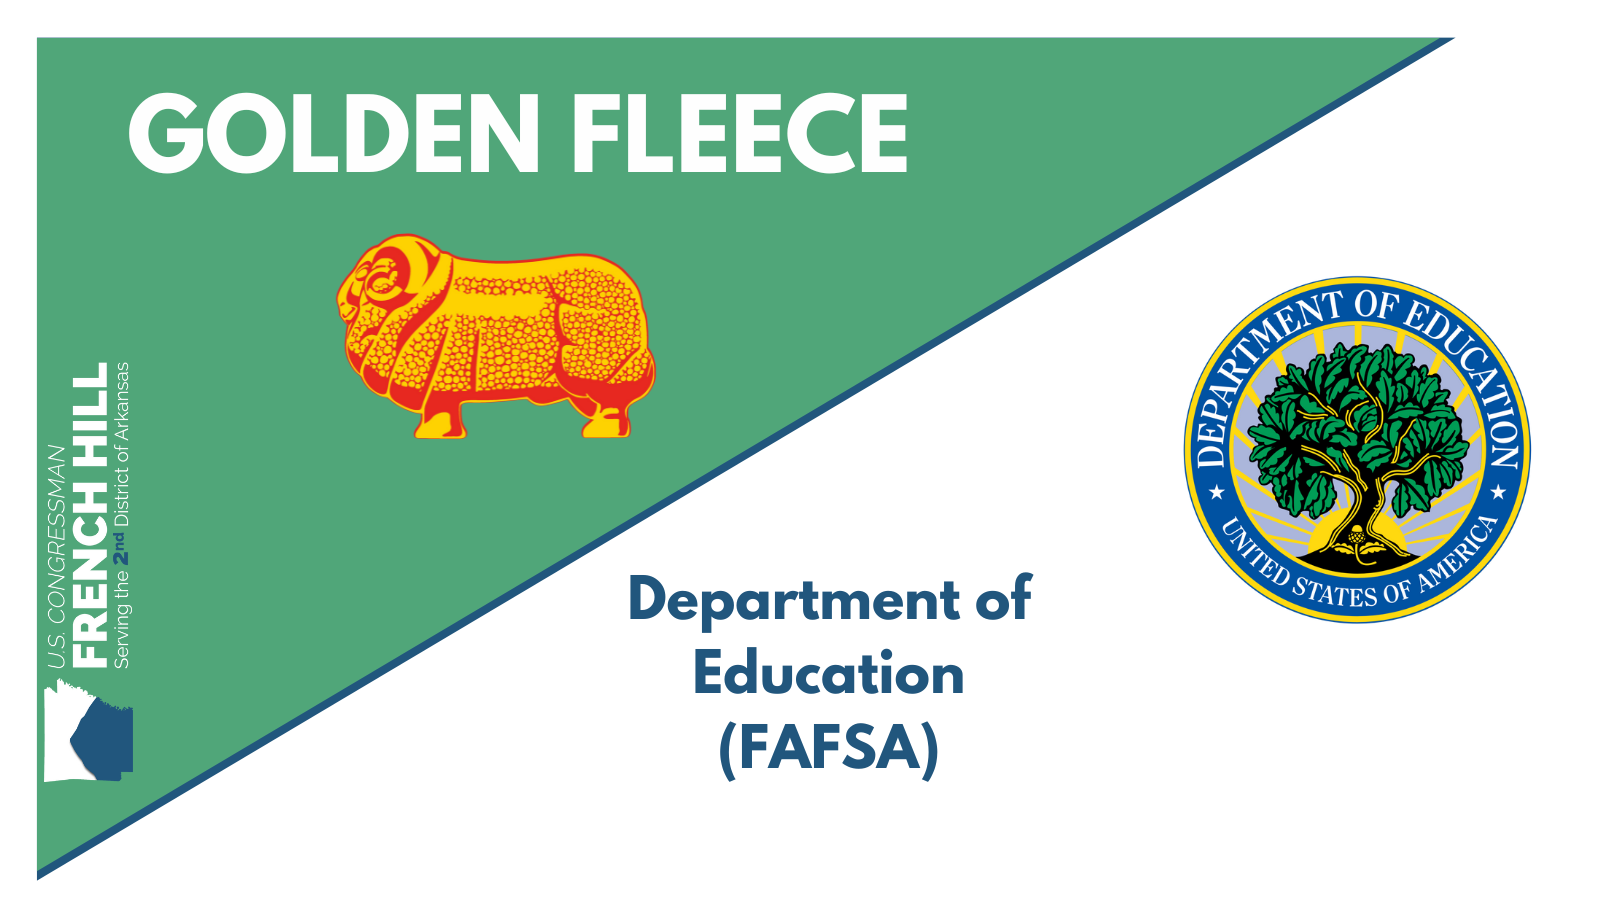 RELEASE: REP. HILL AWARDS GOLDEN FLEECE TO DEPARTMENT OF EDUCATION FOR MISMANAGING FEDERAL STUDENT AID